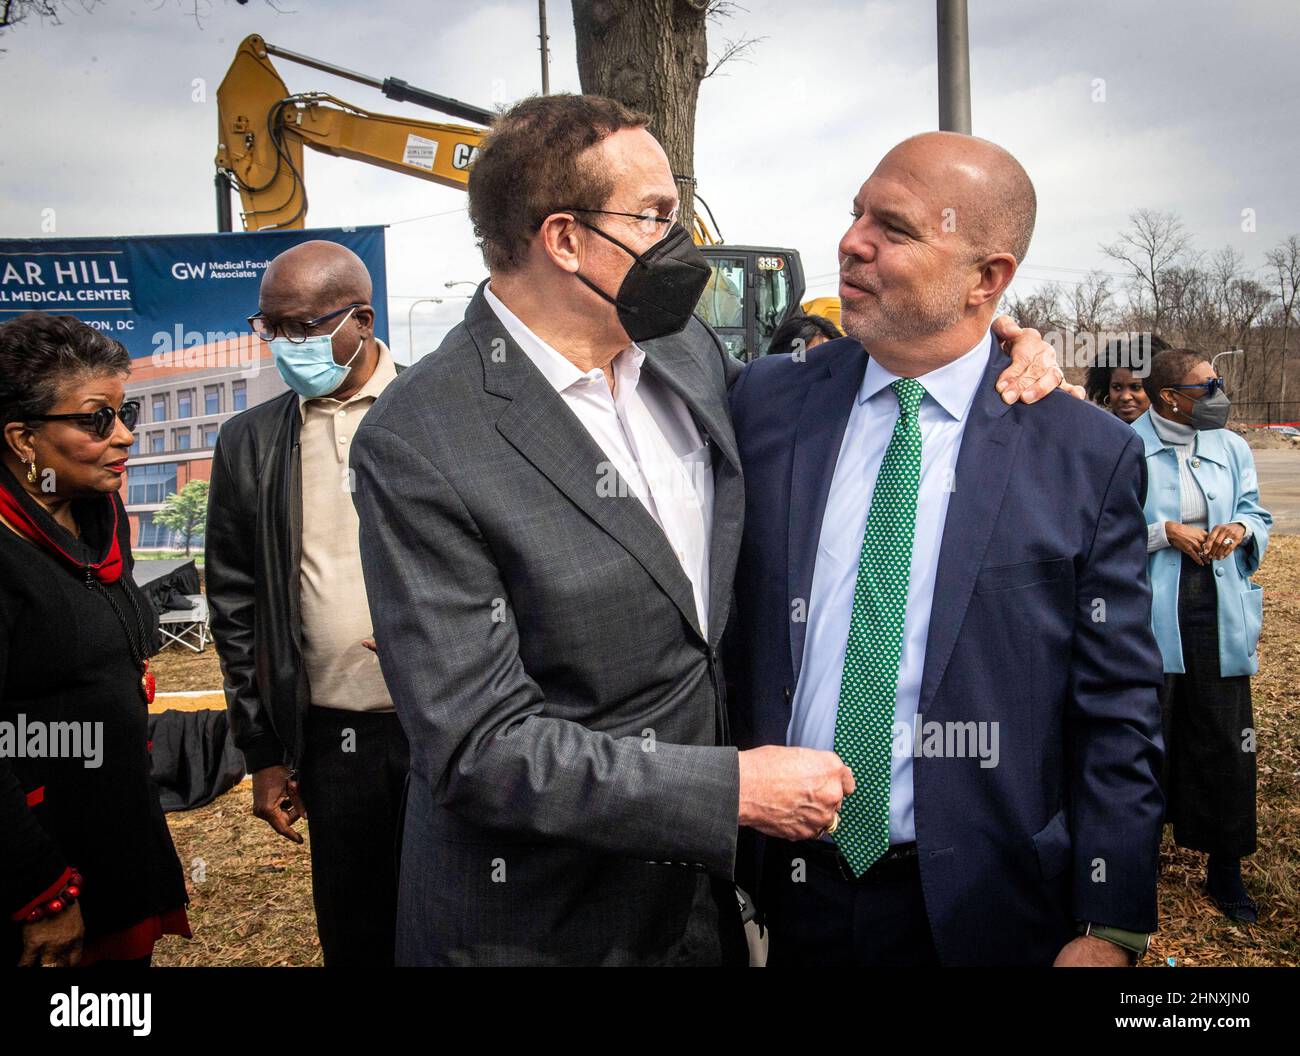 Washington DC, USA. 17th Feb, 2022. Former council person David Catania, right, greets former Mayor Vincent Gray before Mayor Muriel Bowser, Universal Health Services, George Washington University, Children's National Hospital, and other honored guests gather at the groundbreaking and name reveal of the New Hospital at St Elizabeths East Campus in Washington, DC. At far left is Cora Master Barry, widow of the late Mayor Barry. Washington, DC, USA, February 17, 2022. Photo by Bill O’Leary/Pool/ABACAPRESS.COM Credit: Abaca Press/Alamy Live News Stock Photo